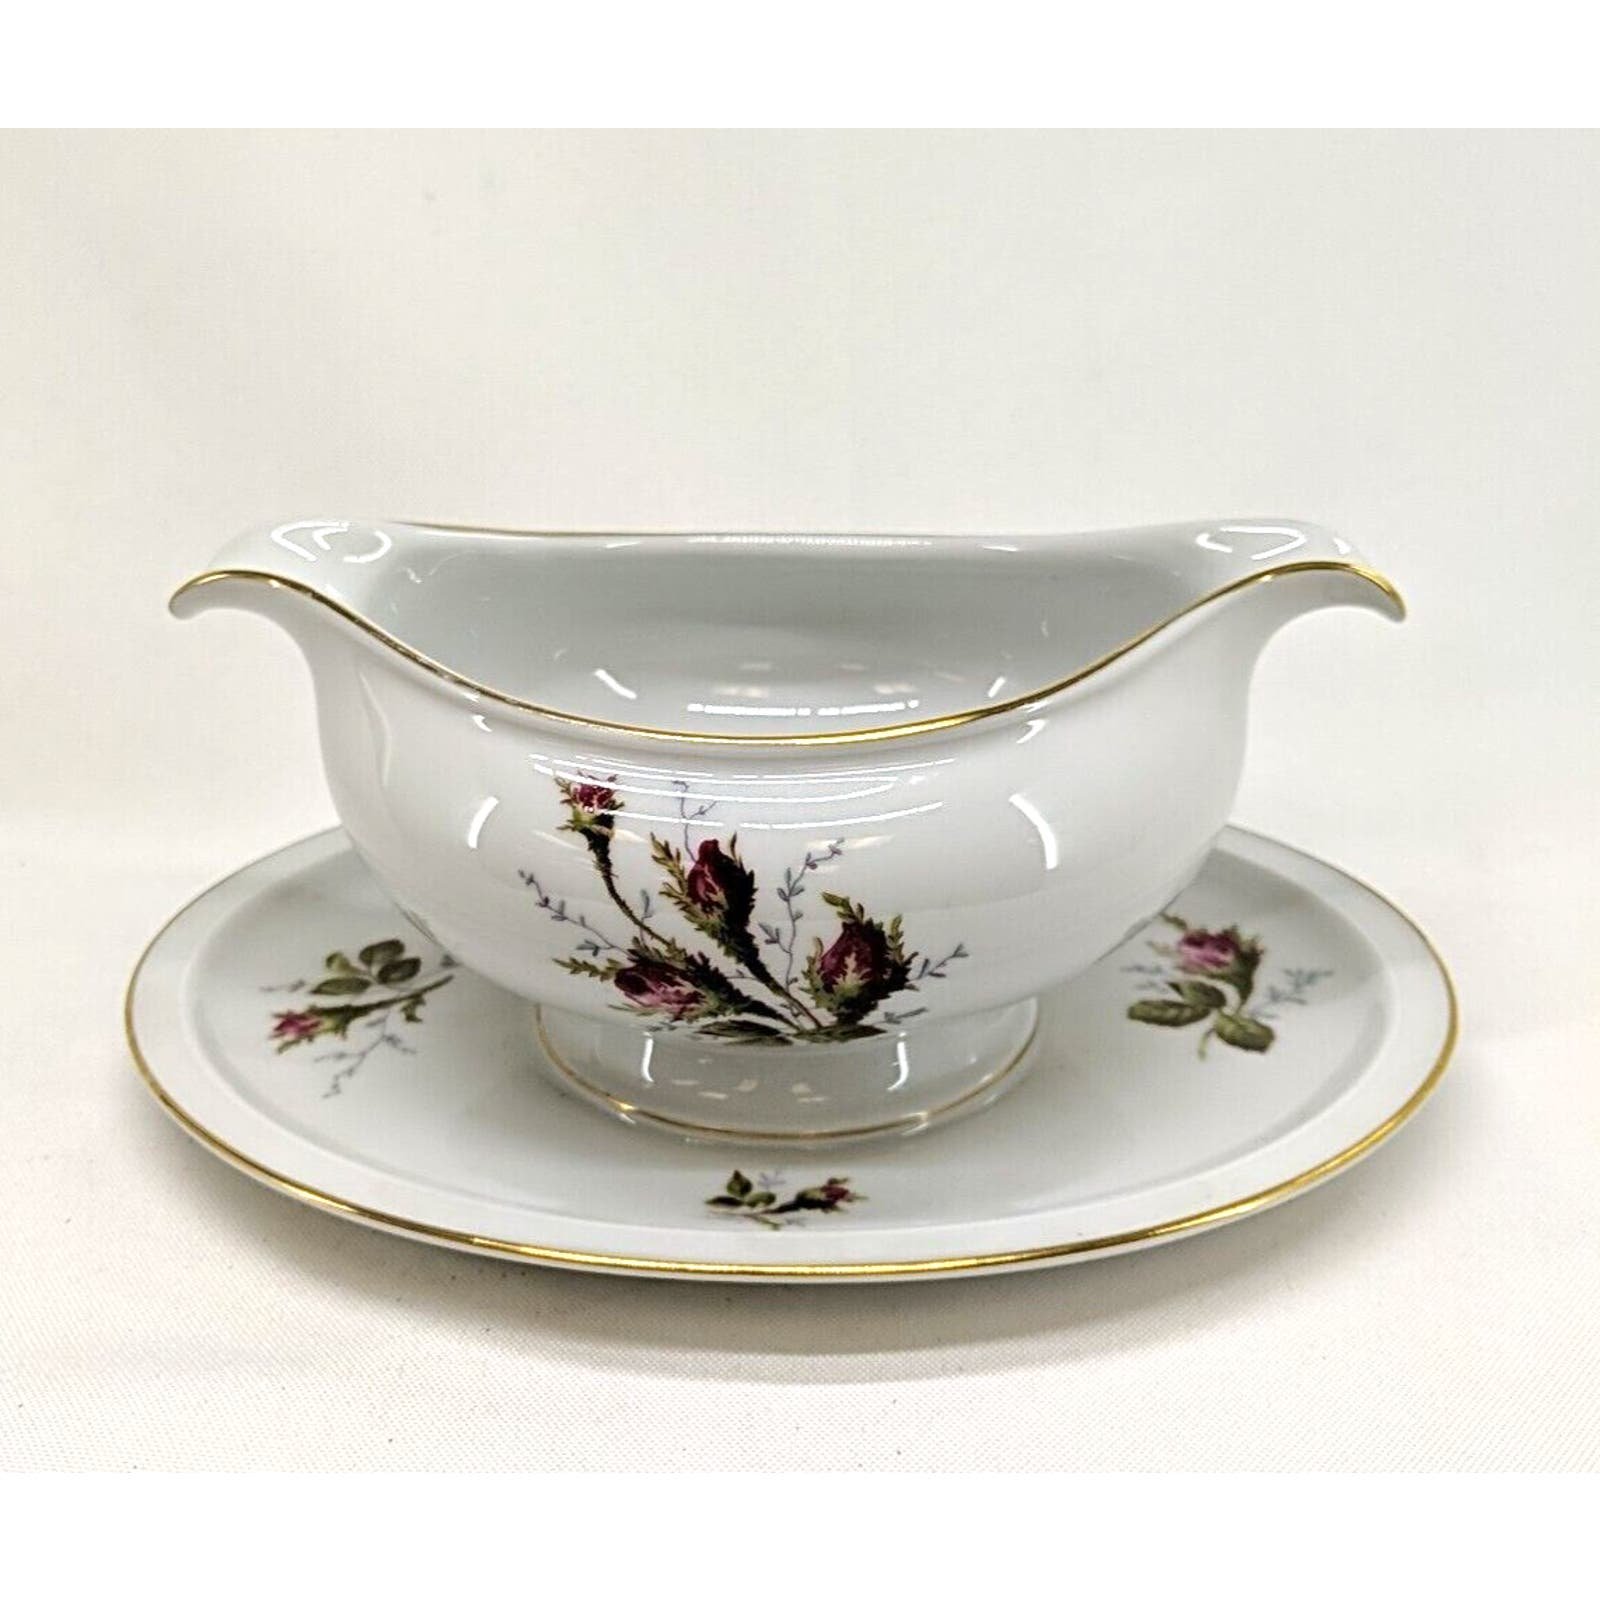 Rosenthal Germany Winifred Moss Rose Gravy Bowl with Attached Underplate CBj21RKr4